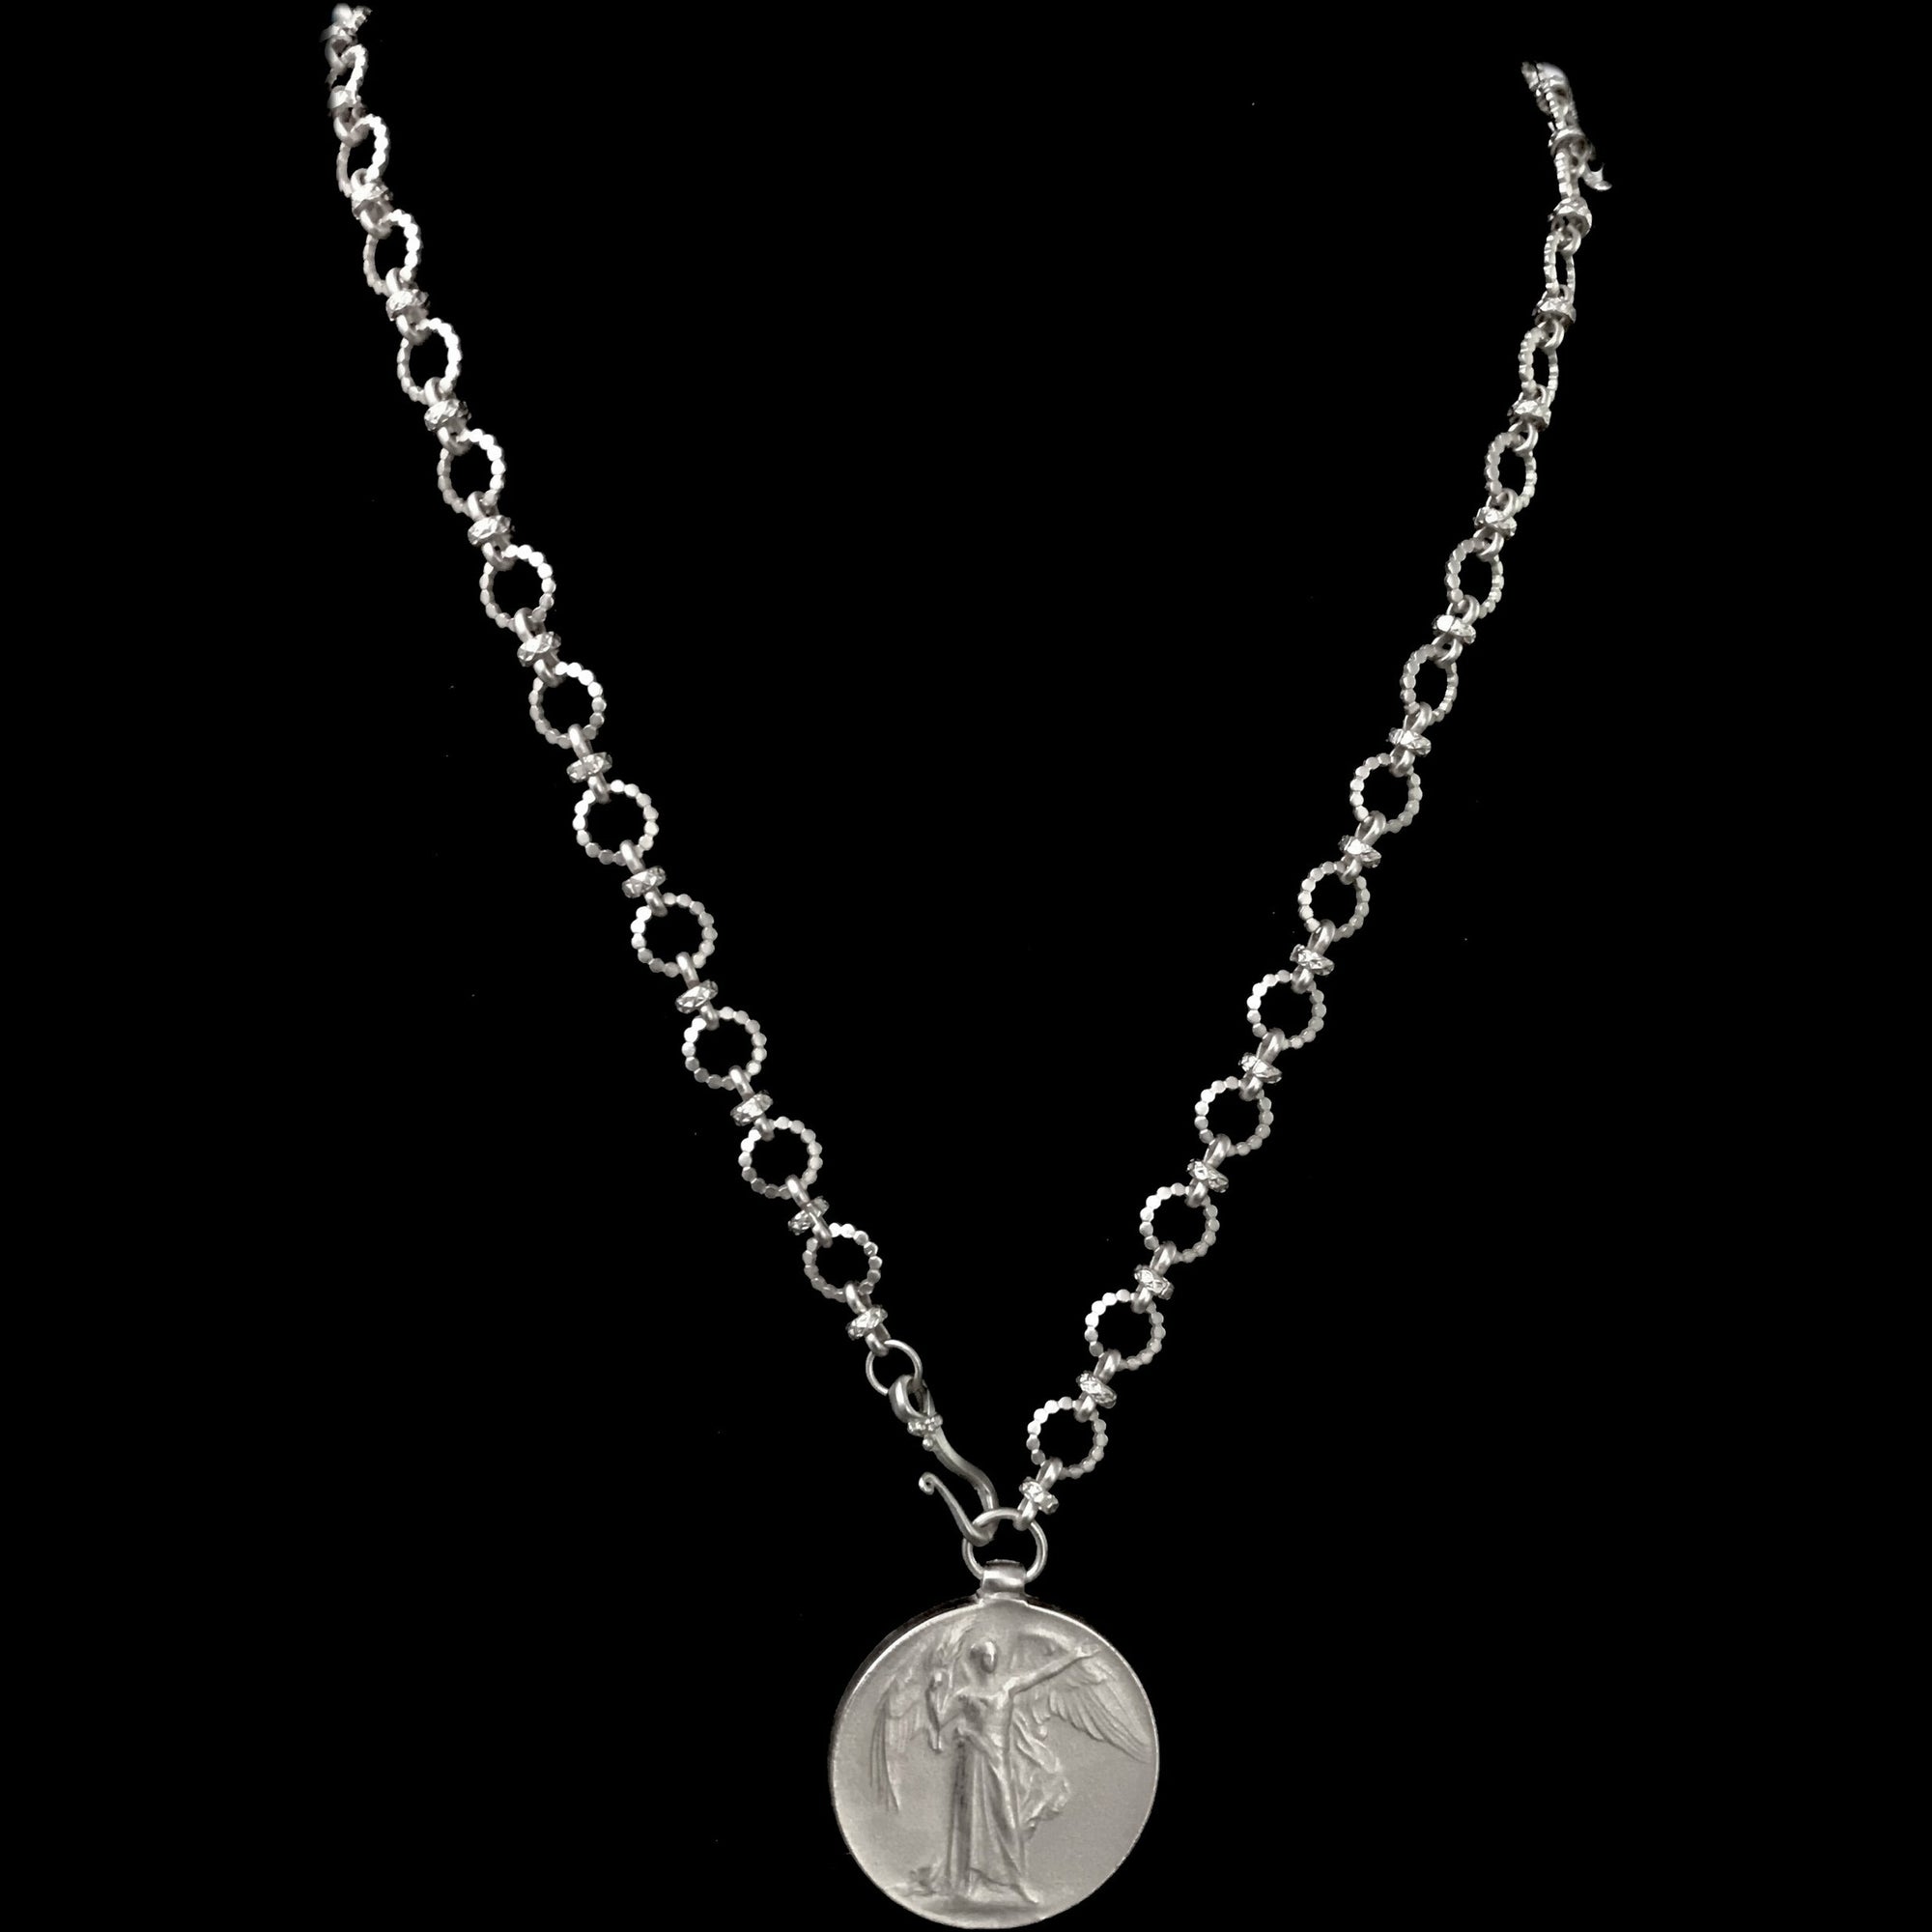 Victoria Eternity Link Chain Necklace - Silver